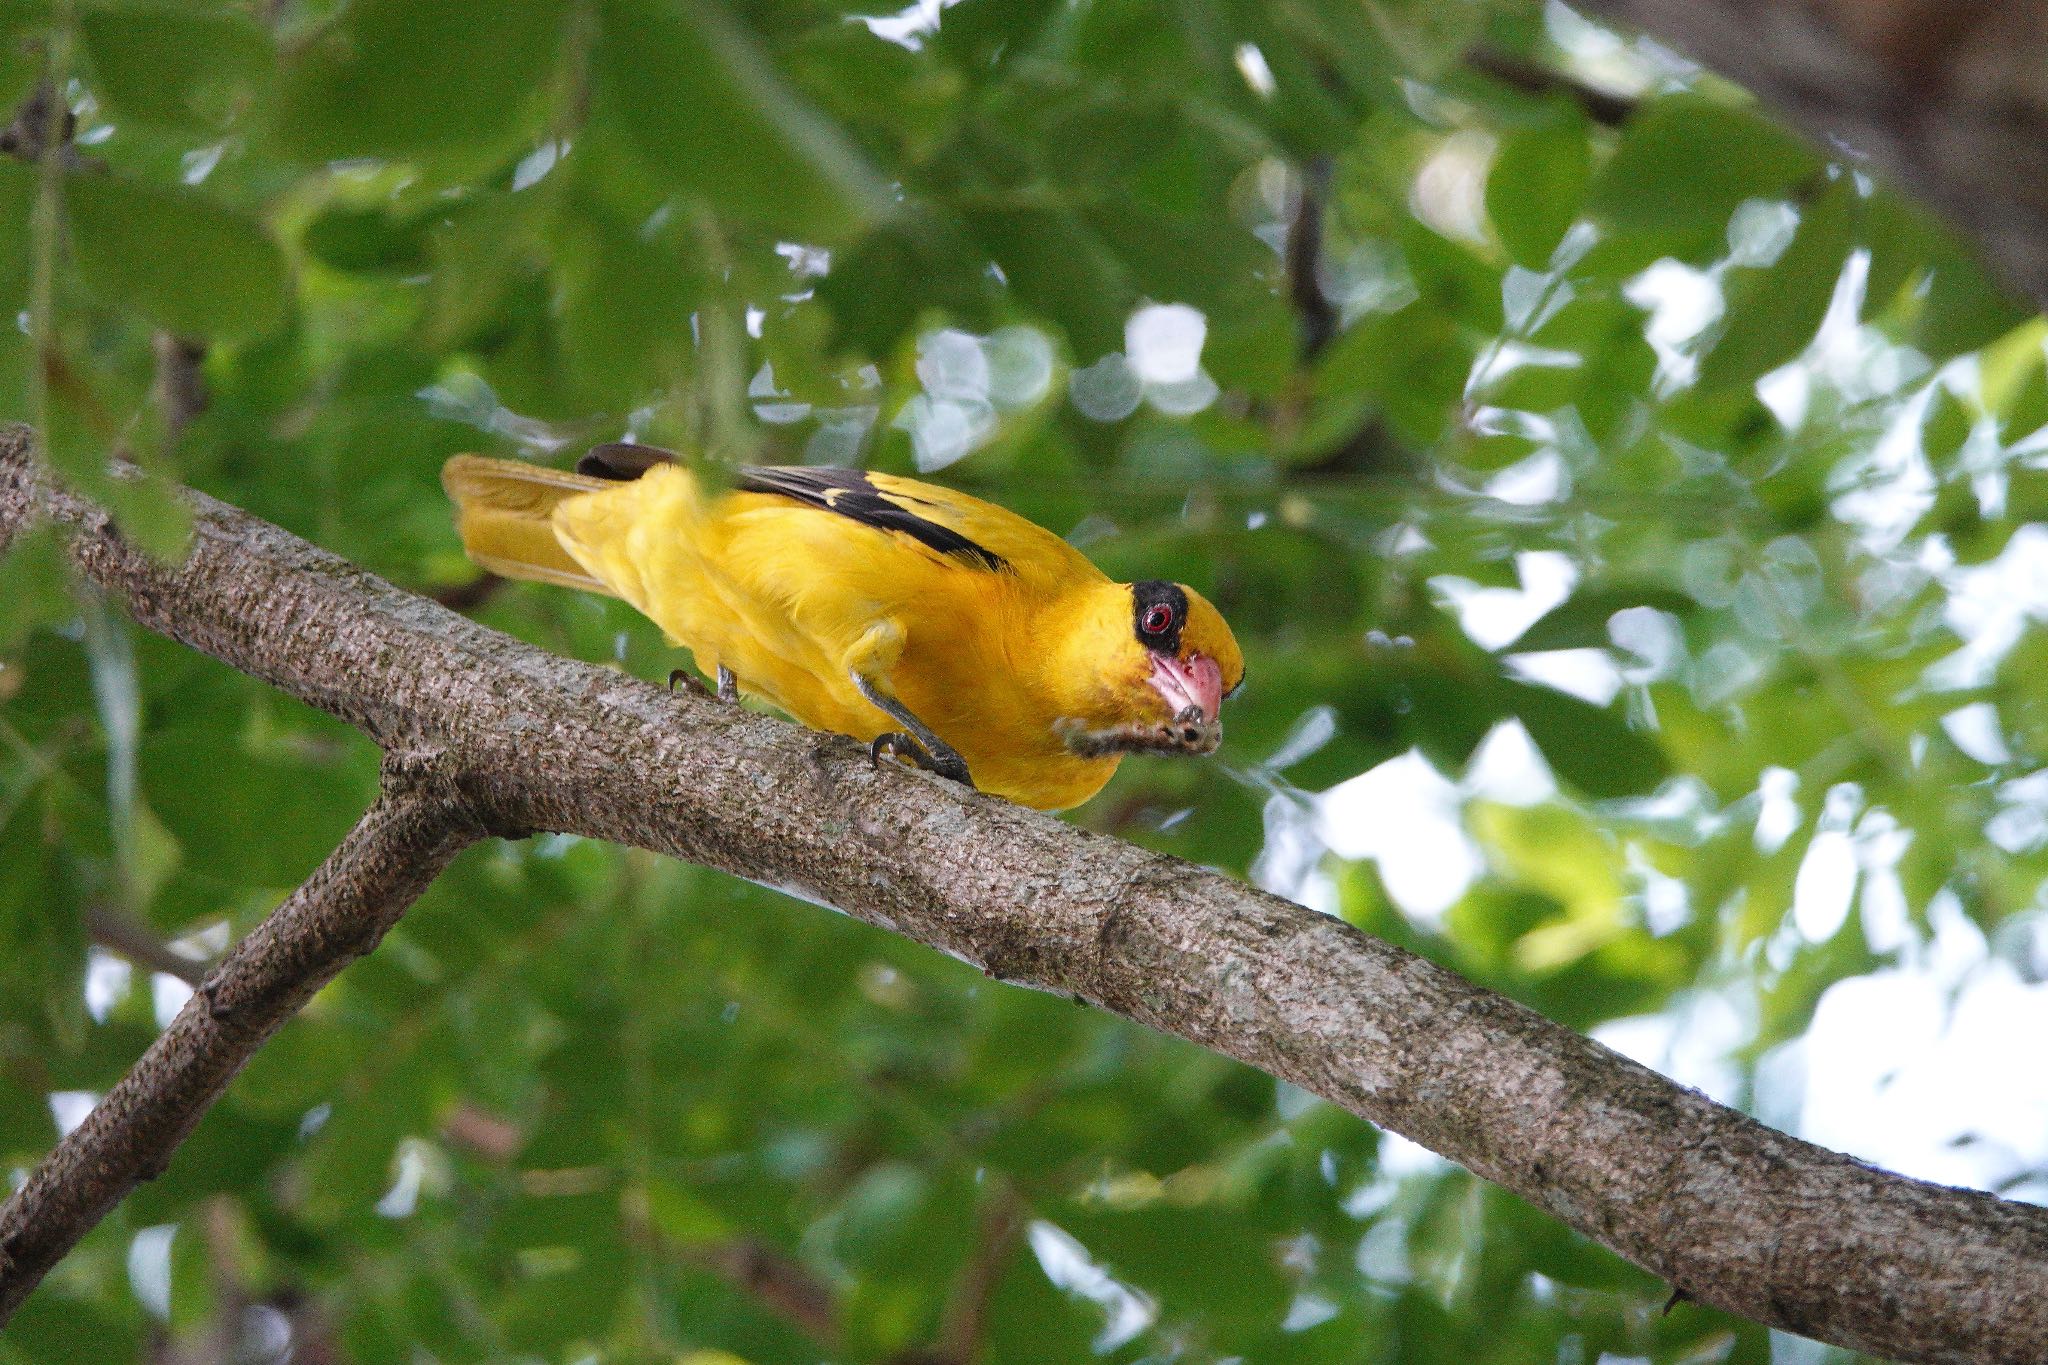 Photo of Black-naped Oriole at Pasir Ris Park (Singapore) by のどか